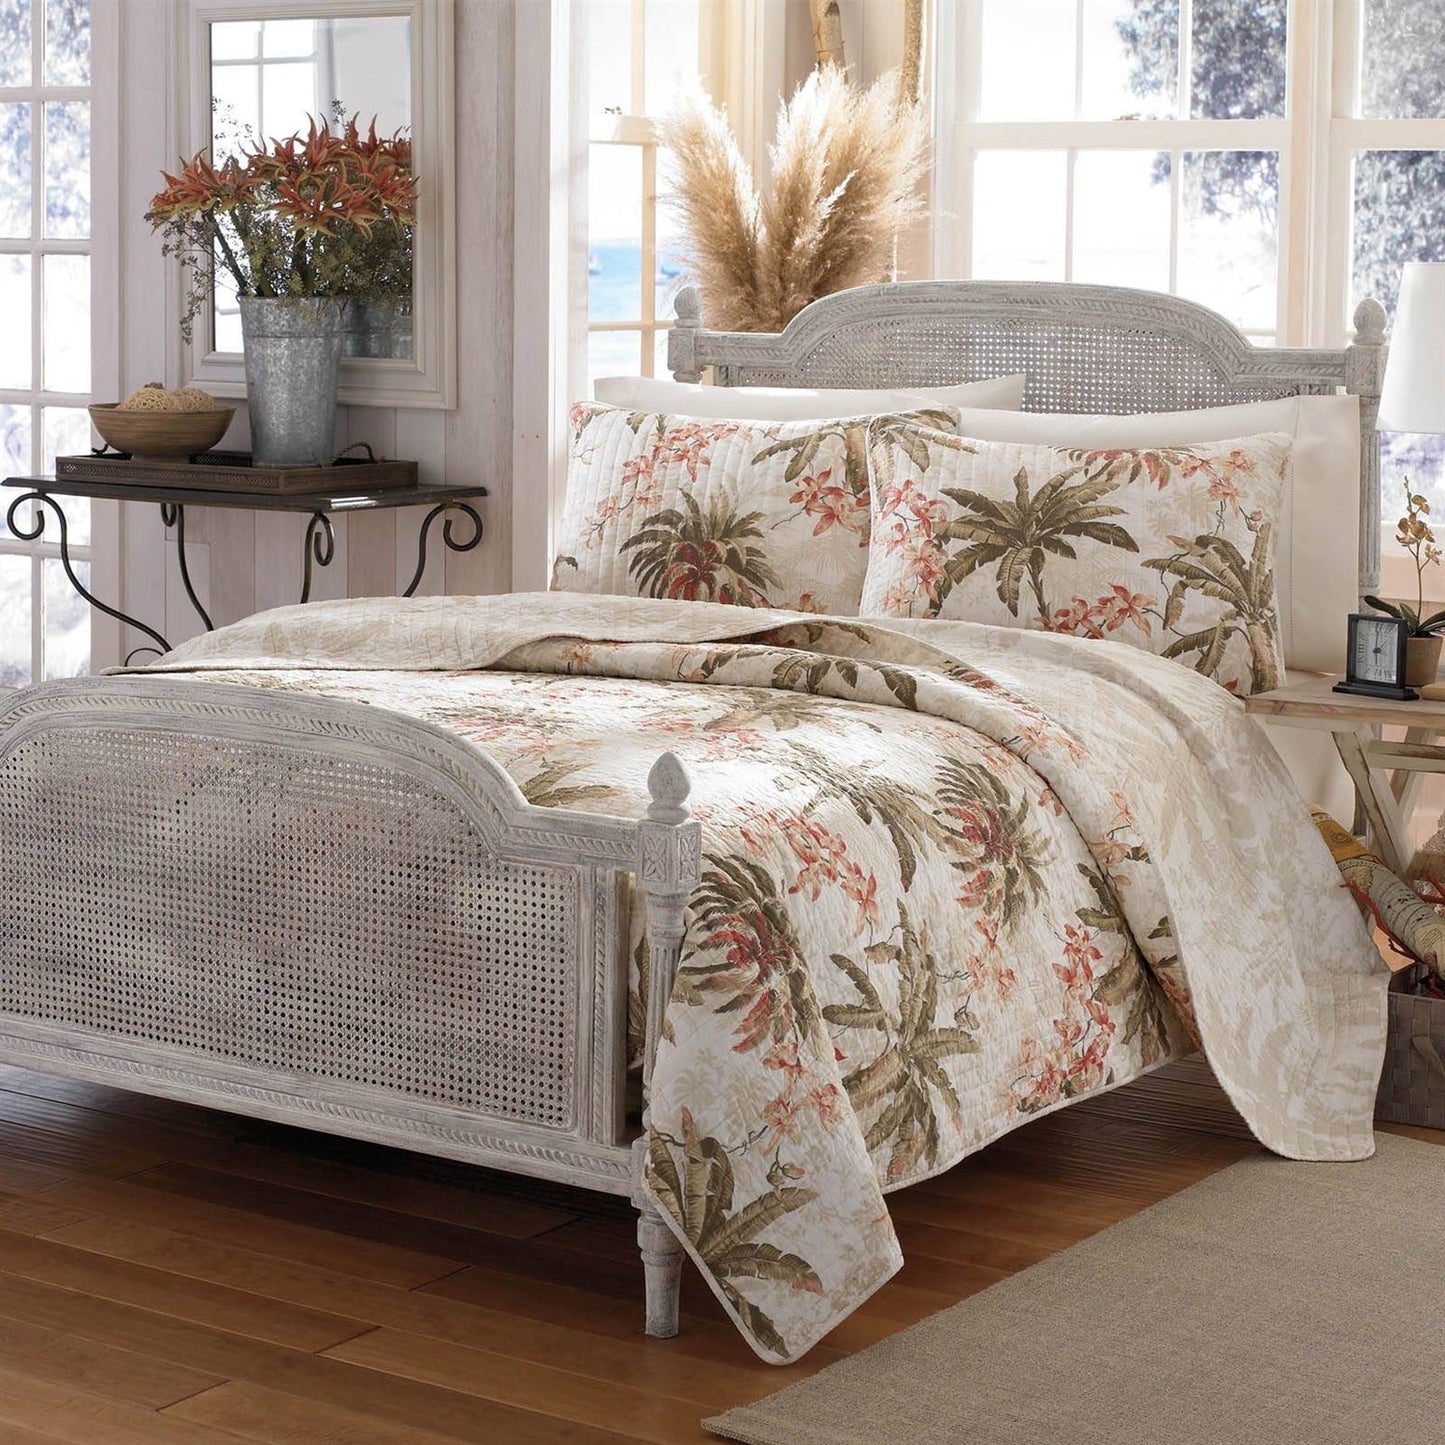 Bedroom > Quilts & Blankets - King Cotton Coastal Palm Tree Floral 3 Piece Reversible Quilt Set